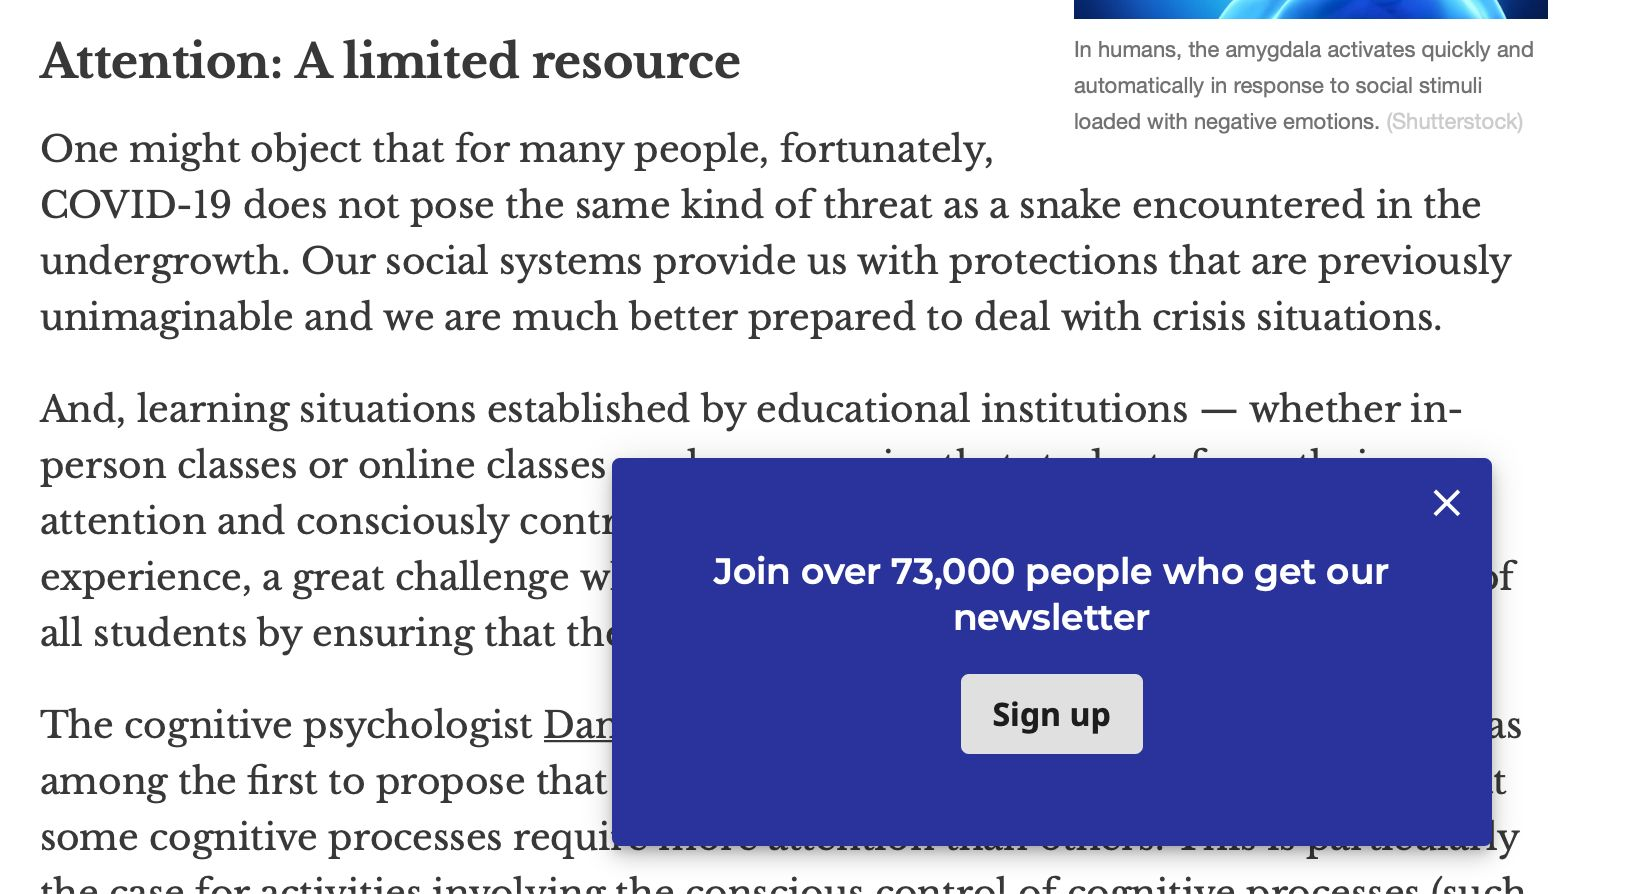 A newsletter modal interrupts the user as they read an article about being a limited resource.